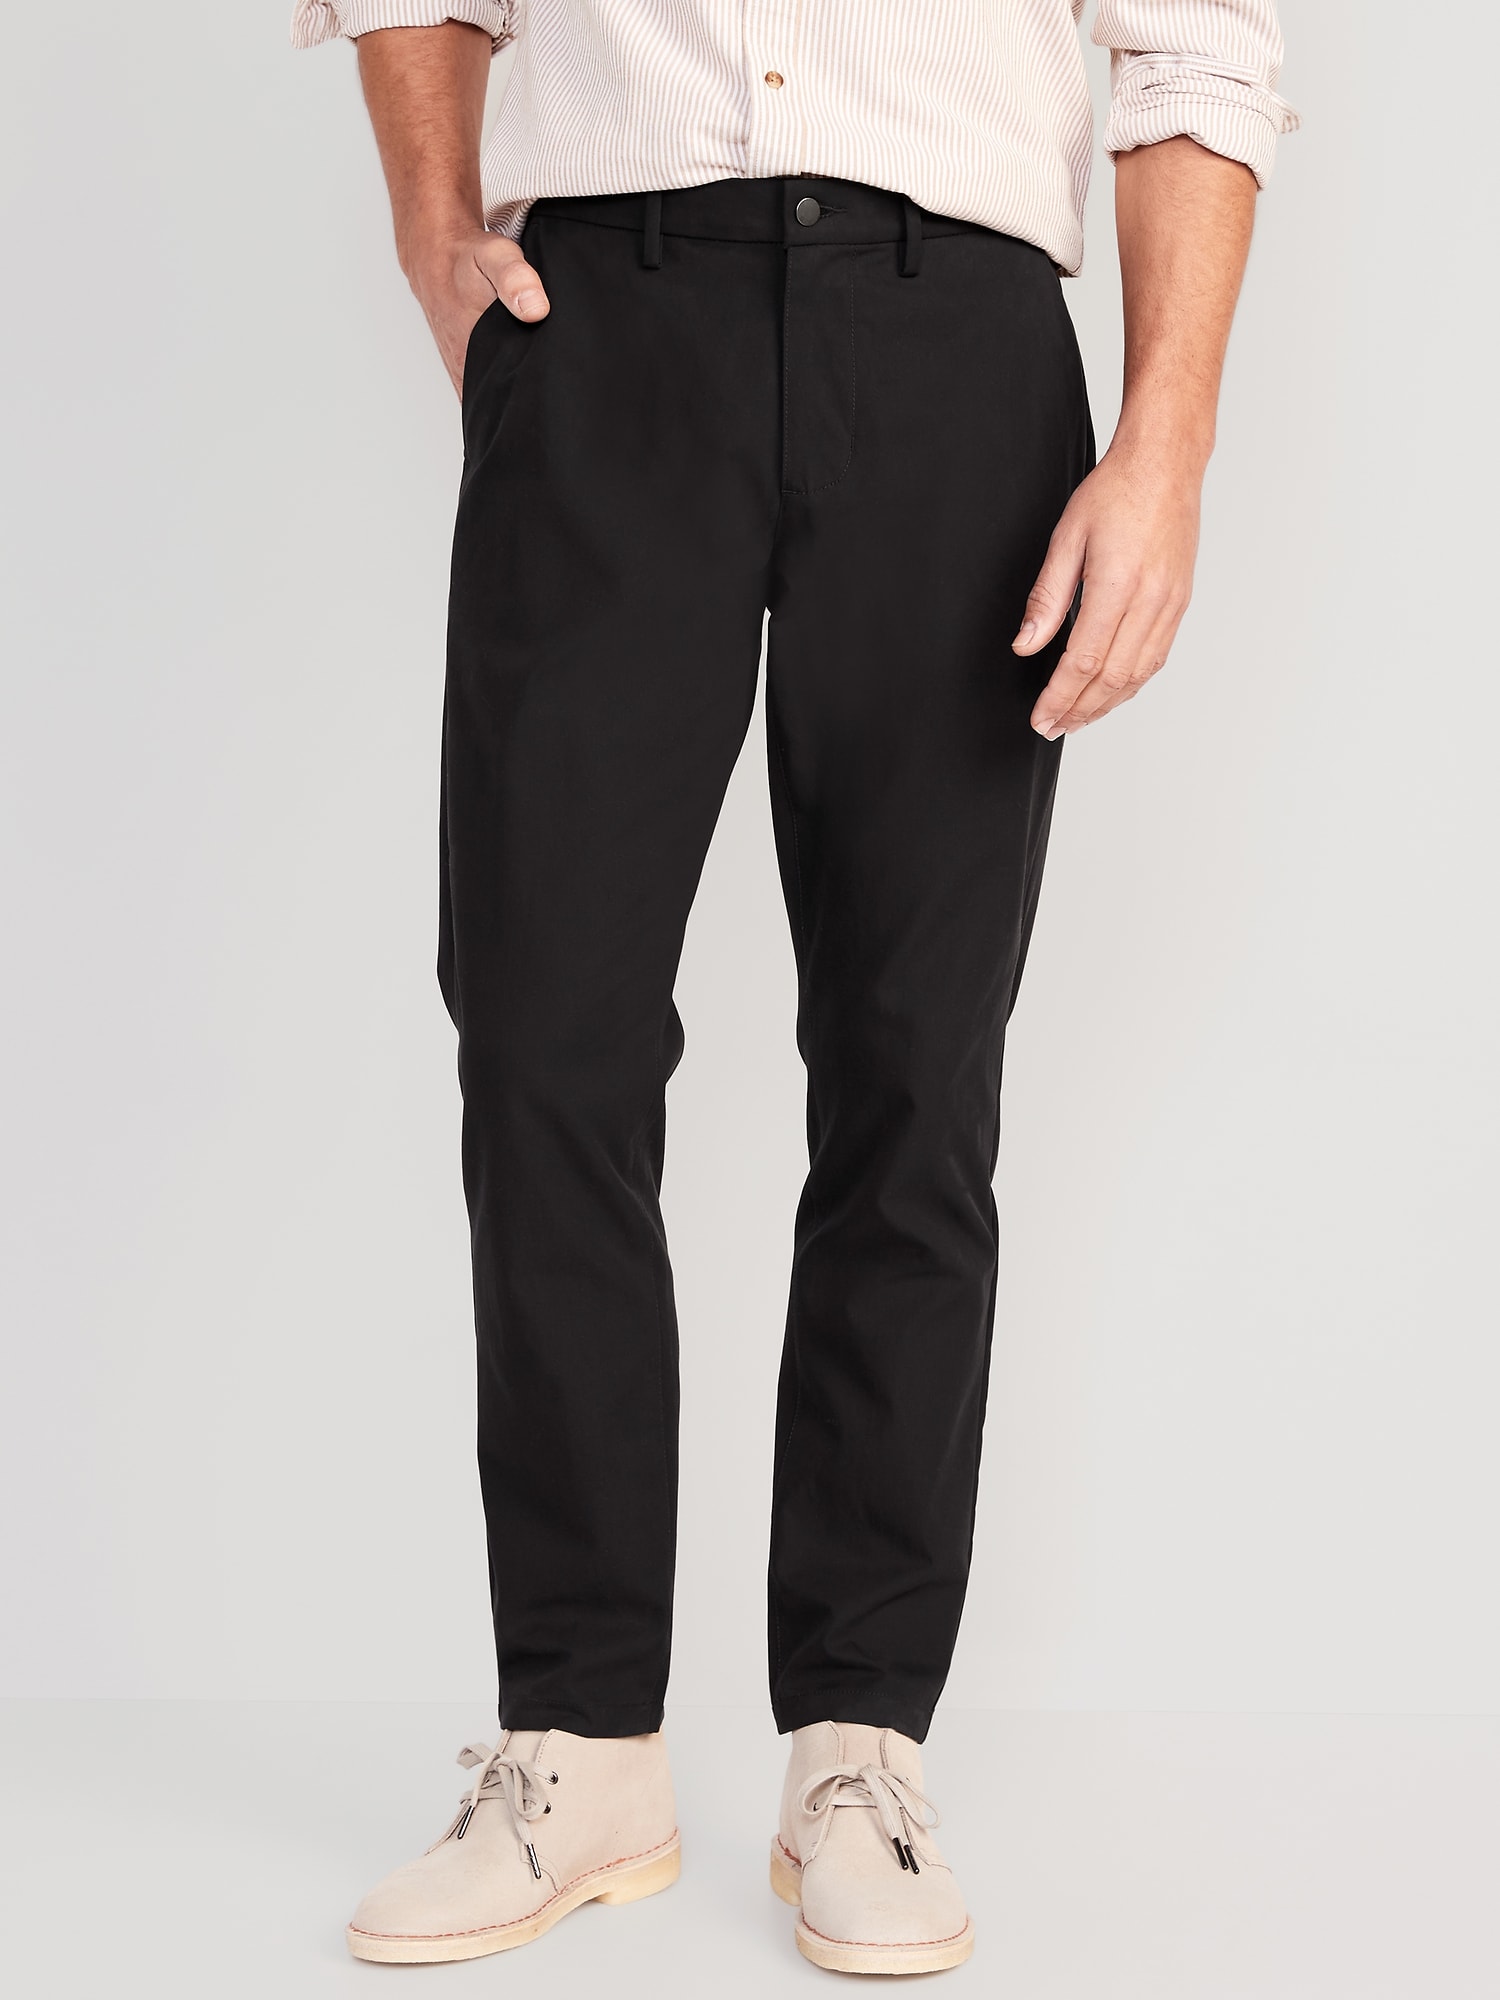 Old Navy Athletic Ultimate Tech Built-In Flex Chino Pants black. 1